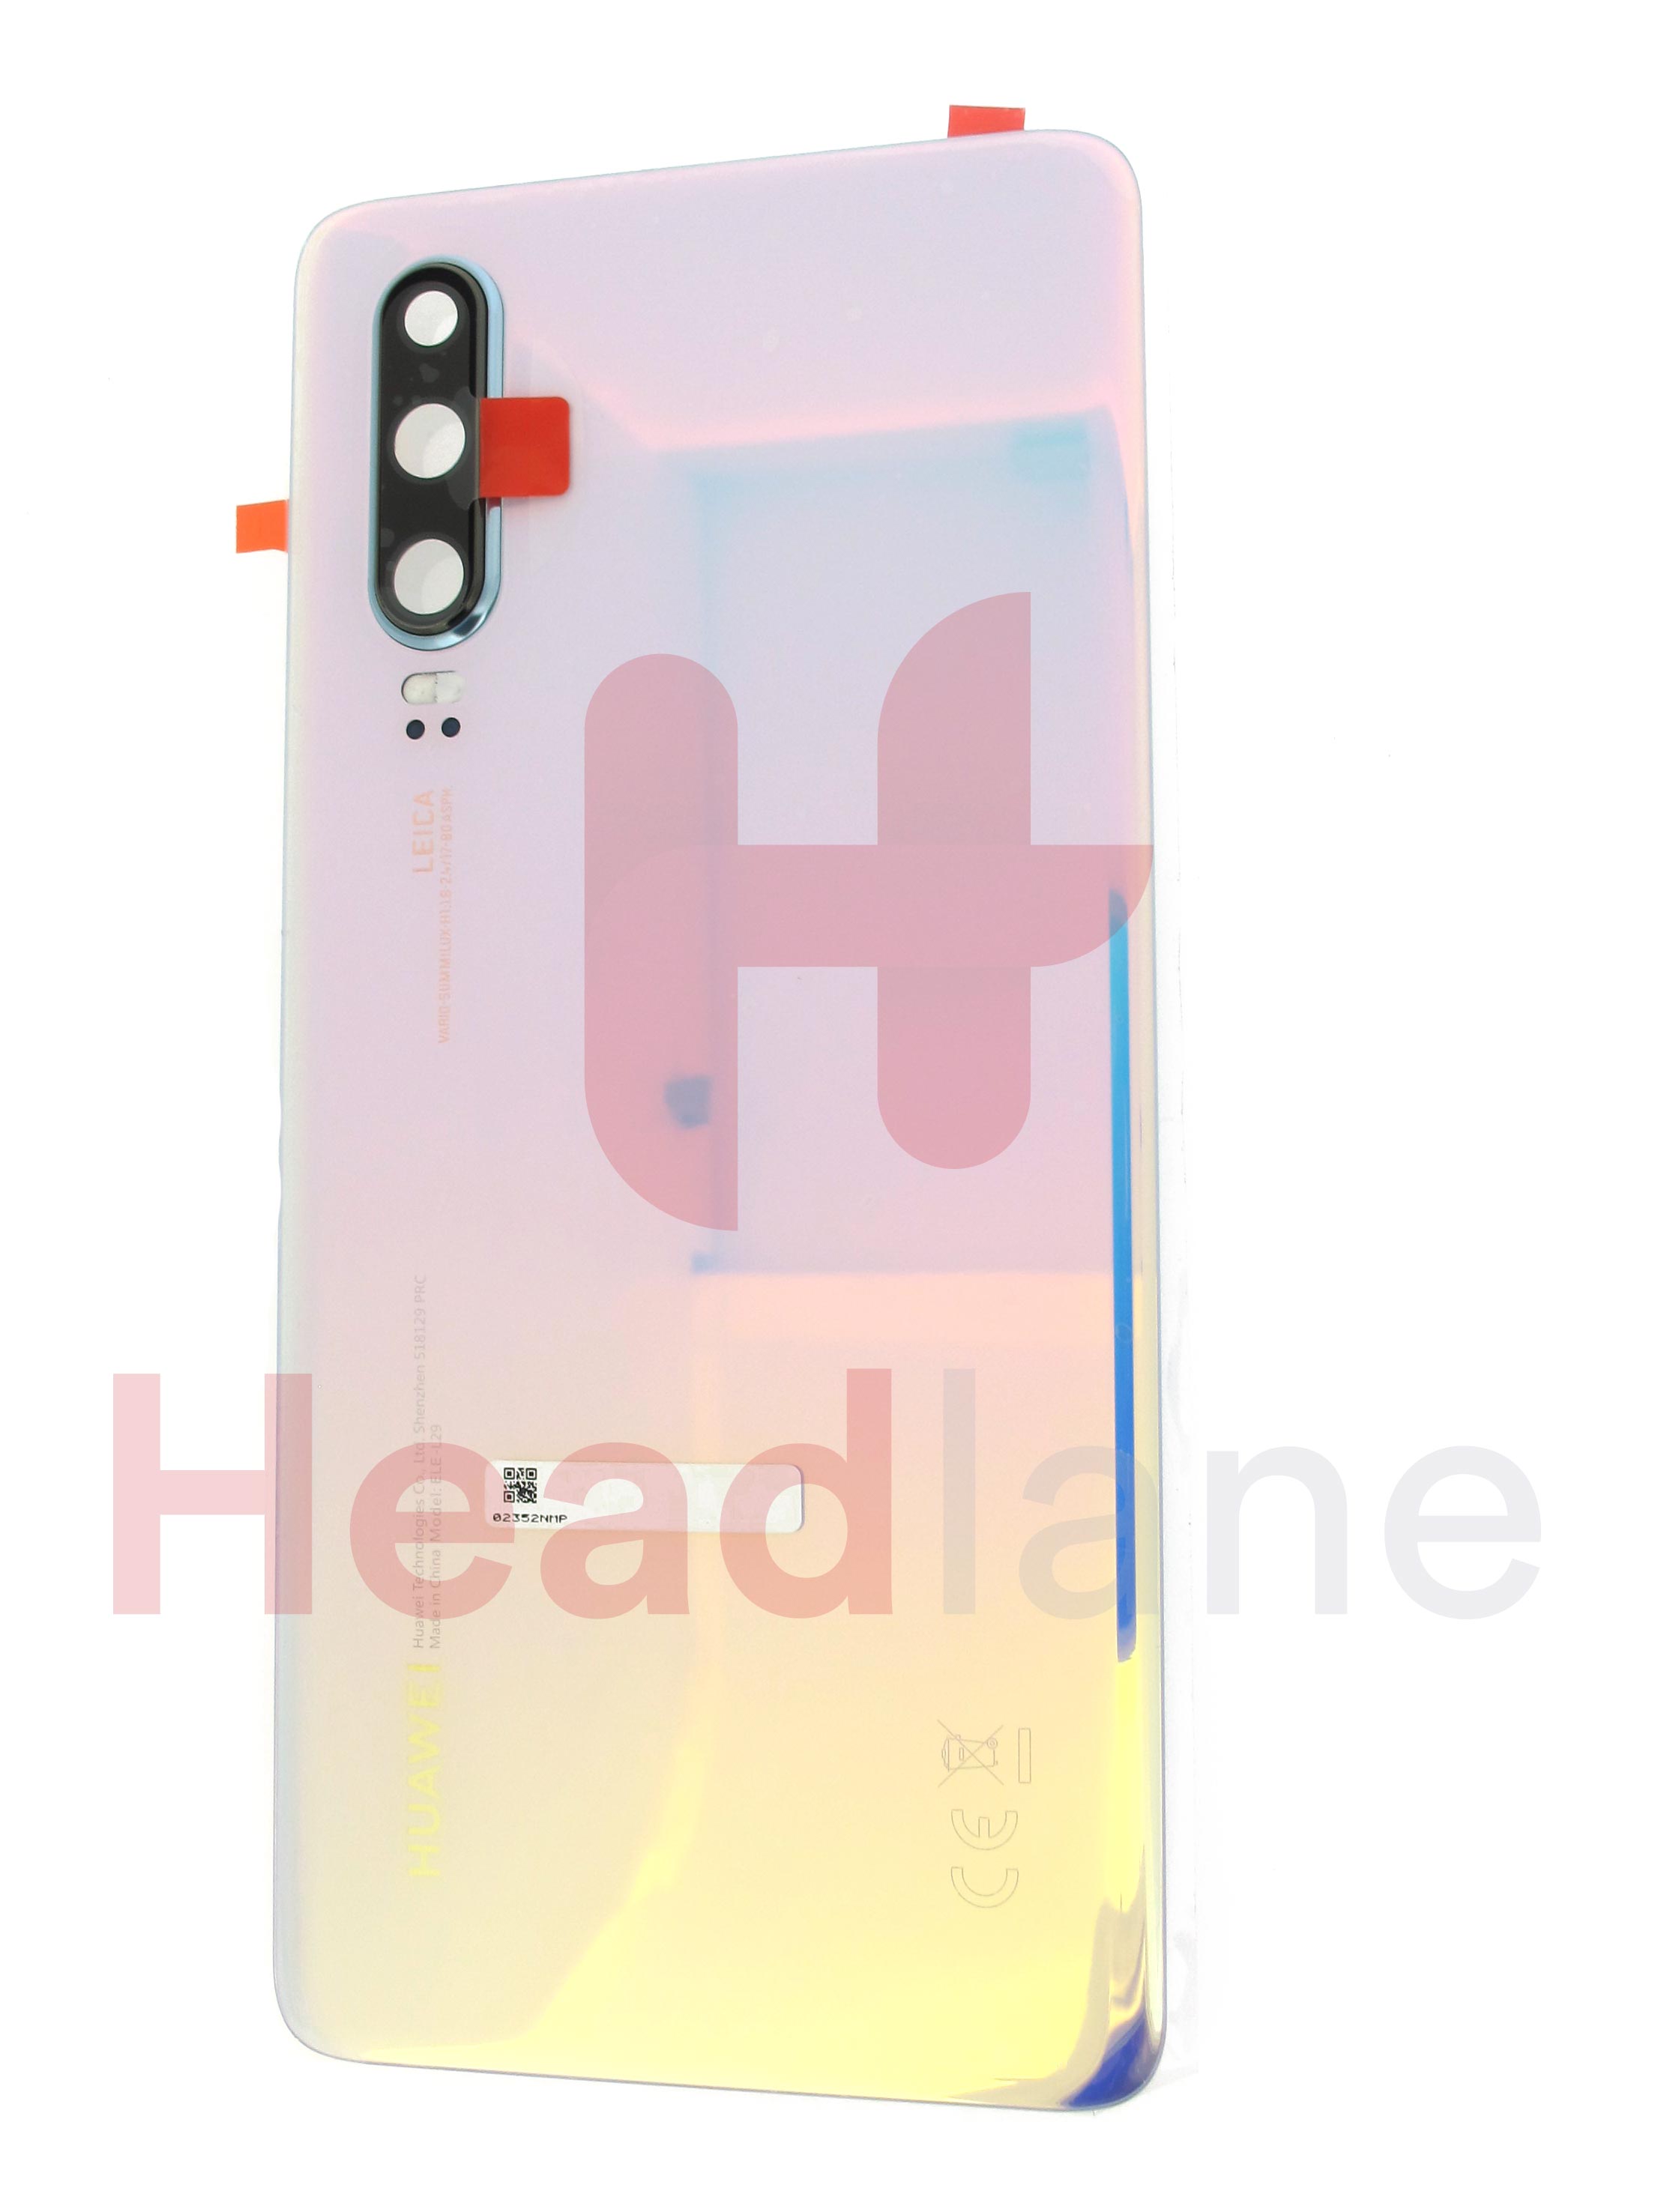 Huawei P30 Back / Battery Cover -  Breathing Crystal